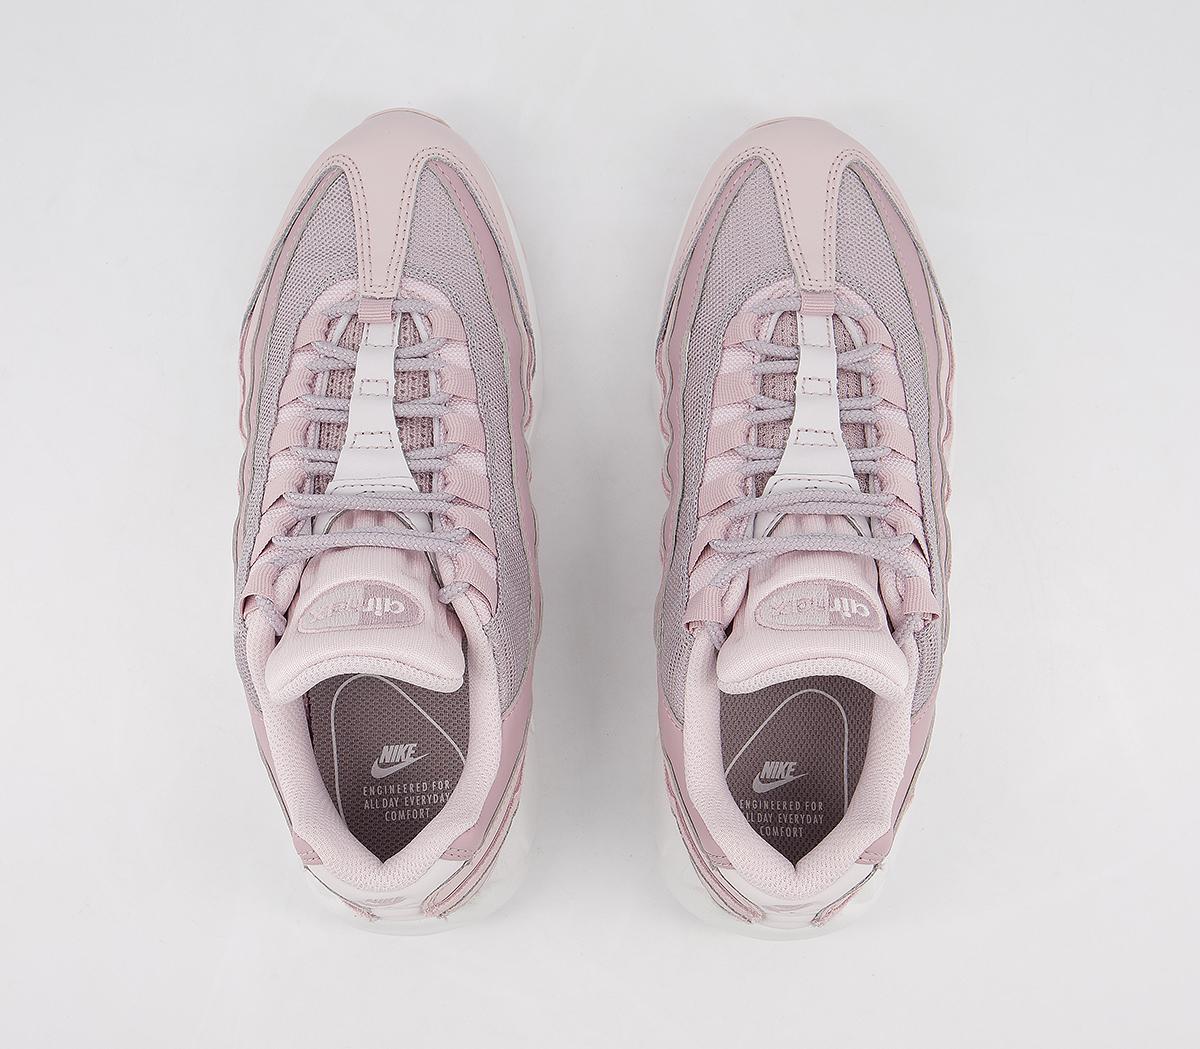 Nike Air Max 95 Trainers Barly Rose Plum Chalk Silver Lilac - Women's ...